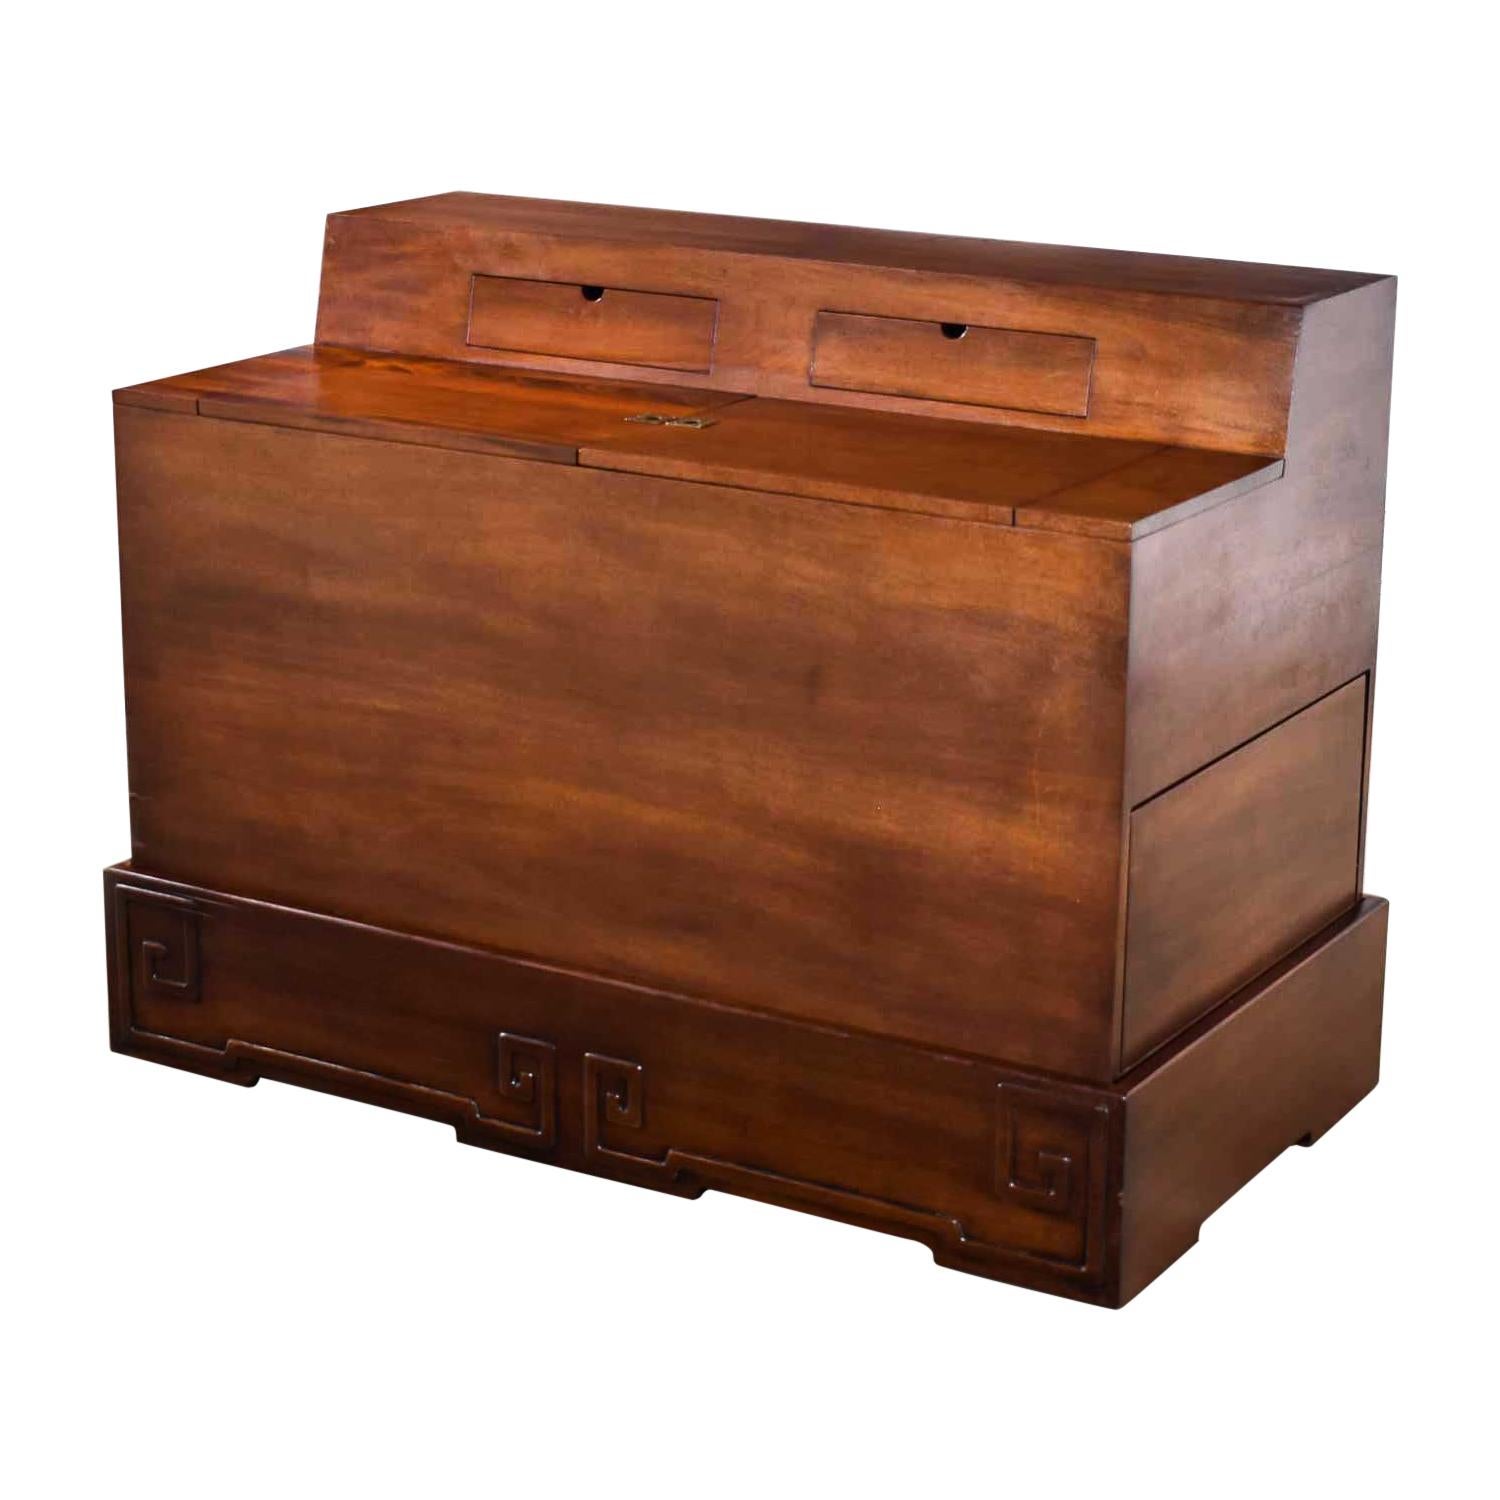 Art Deco Style Mahogany Entry Desk or Bar by IMA S.A. Bogota, Colombia For Sale